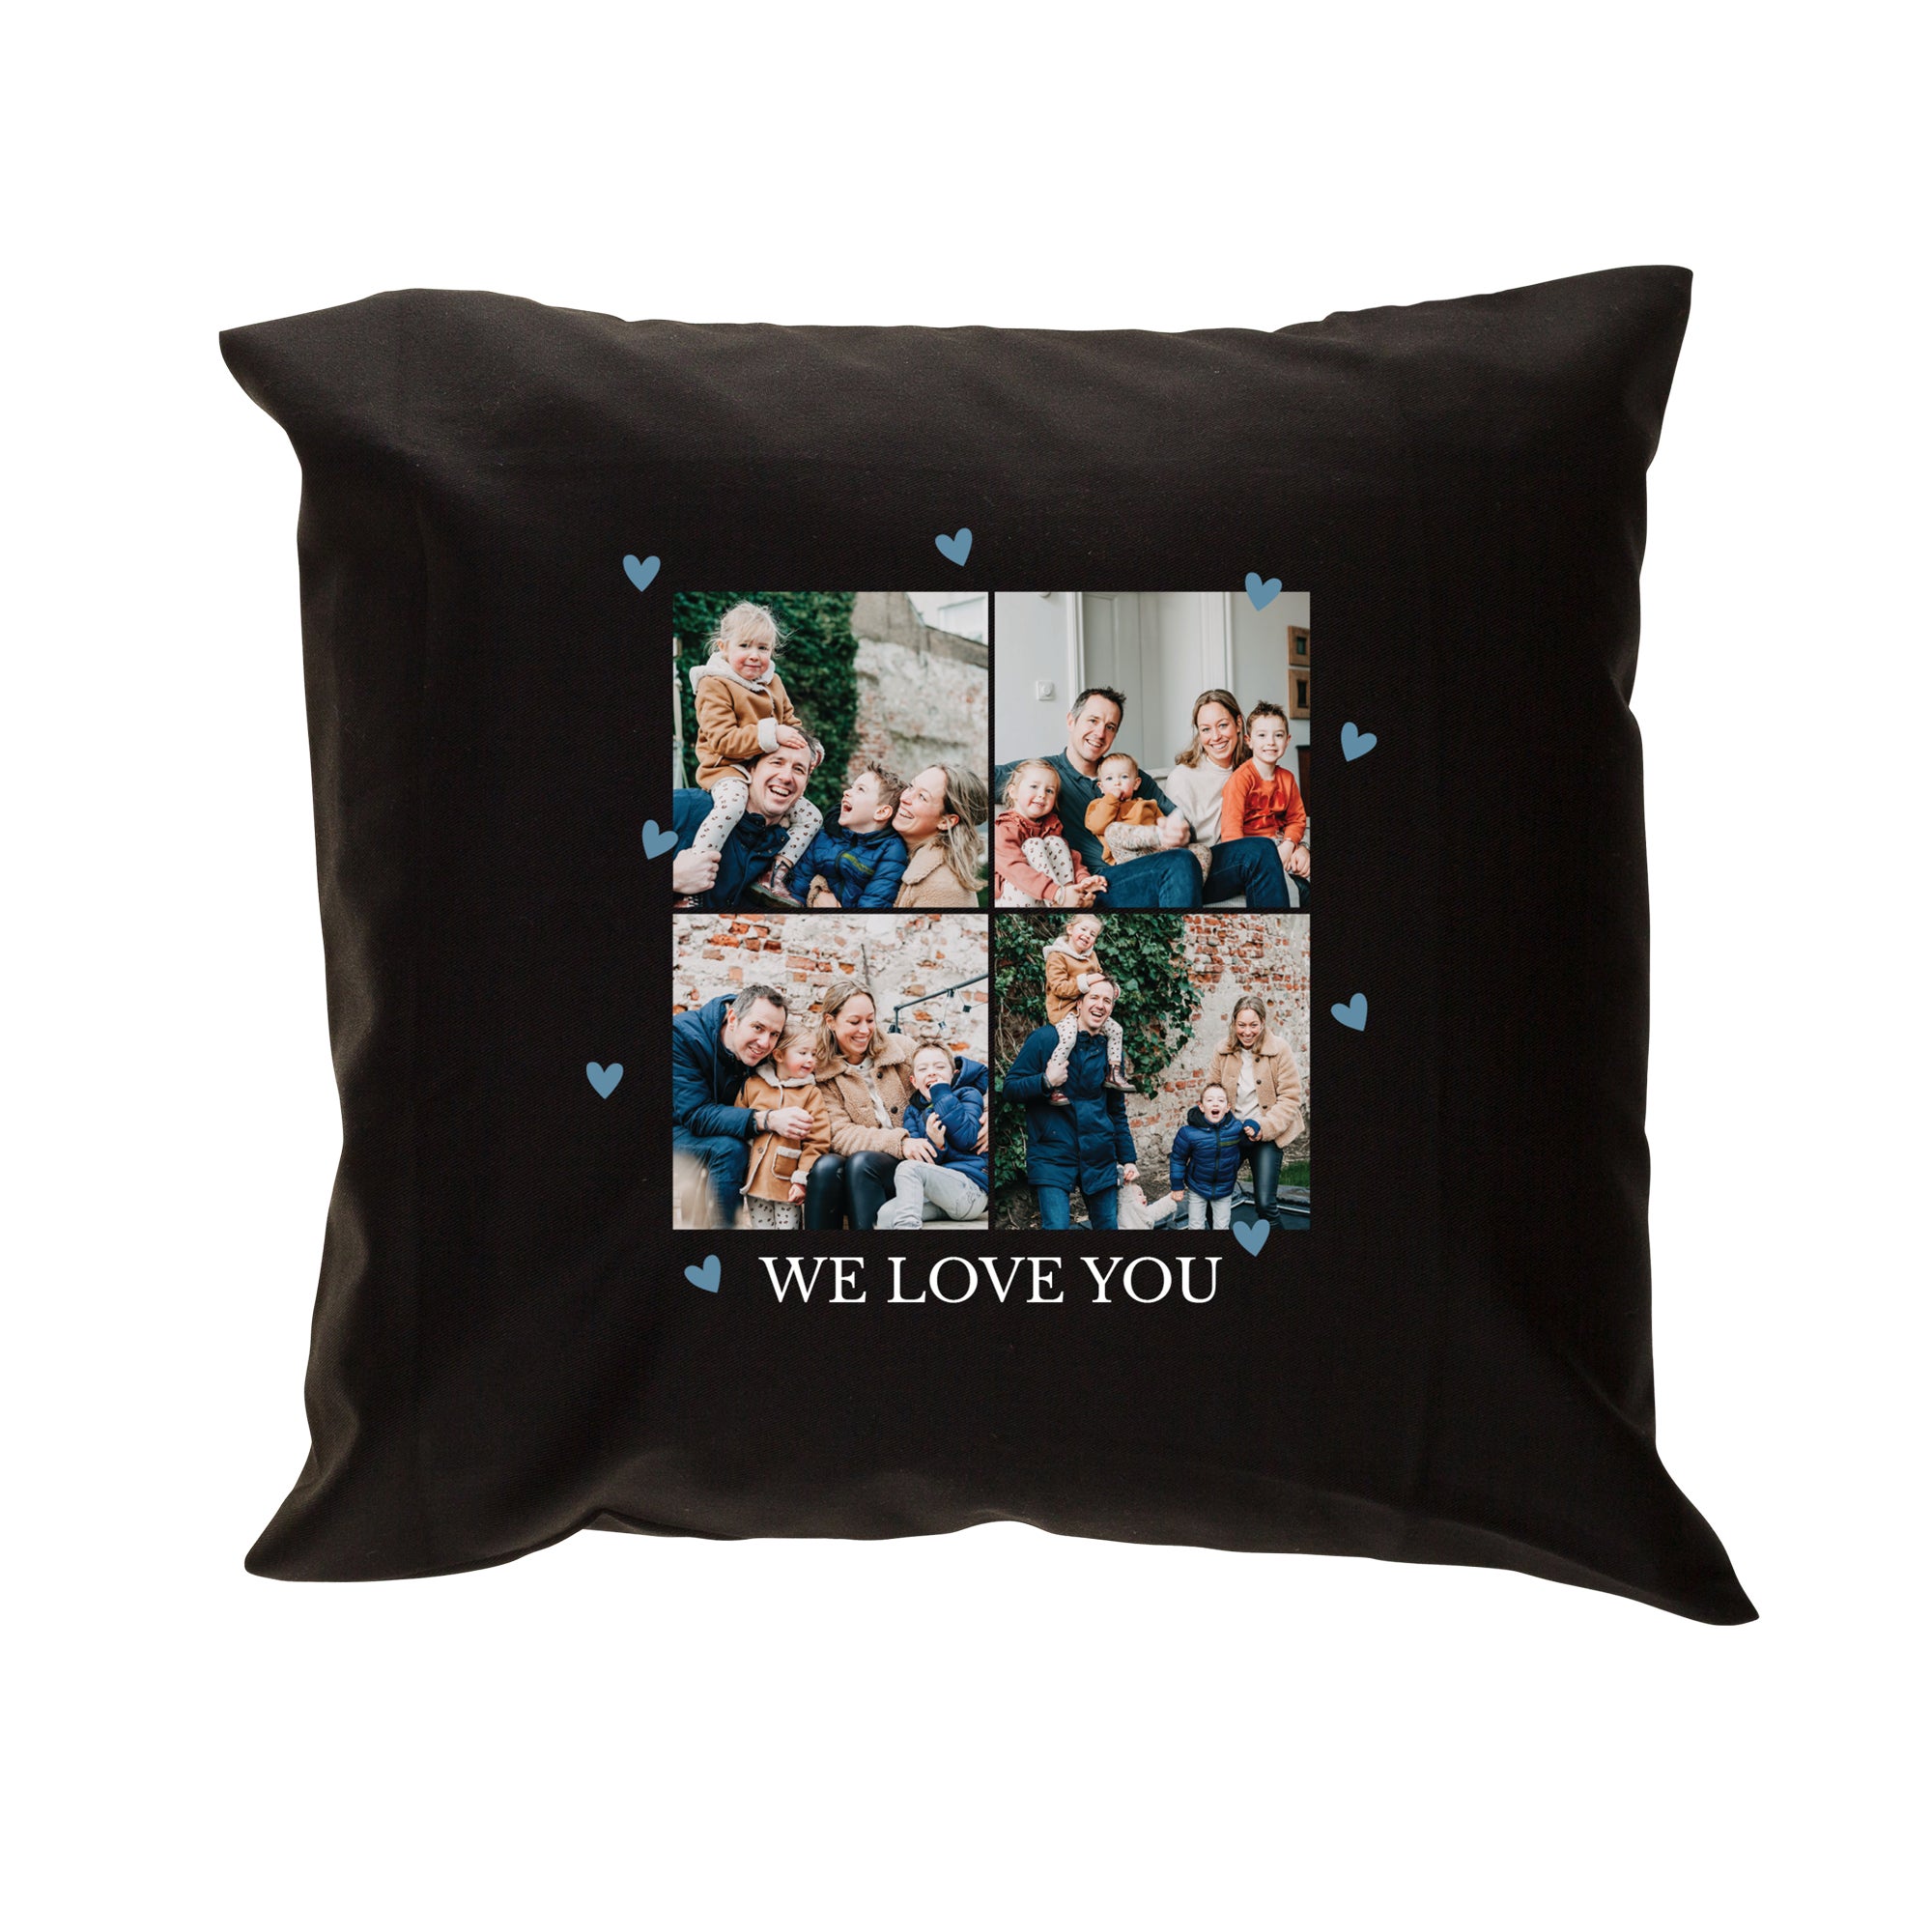 Personalised cushion - Father's Day - Black - 40 x 40 cm